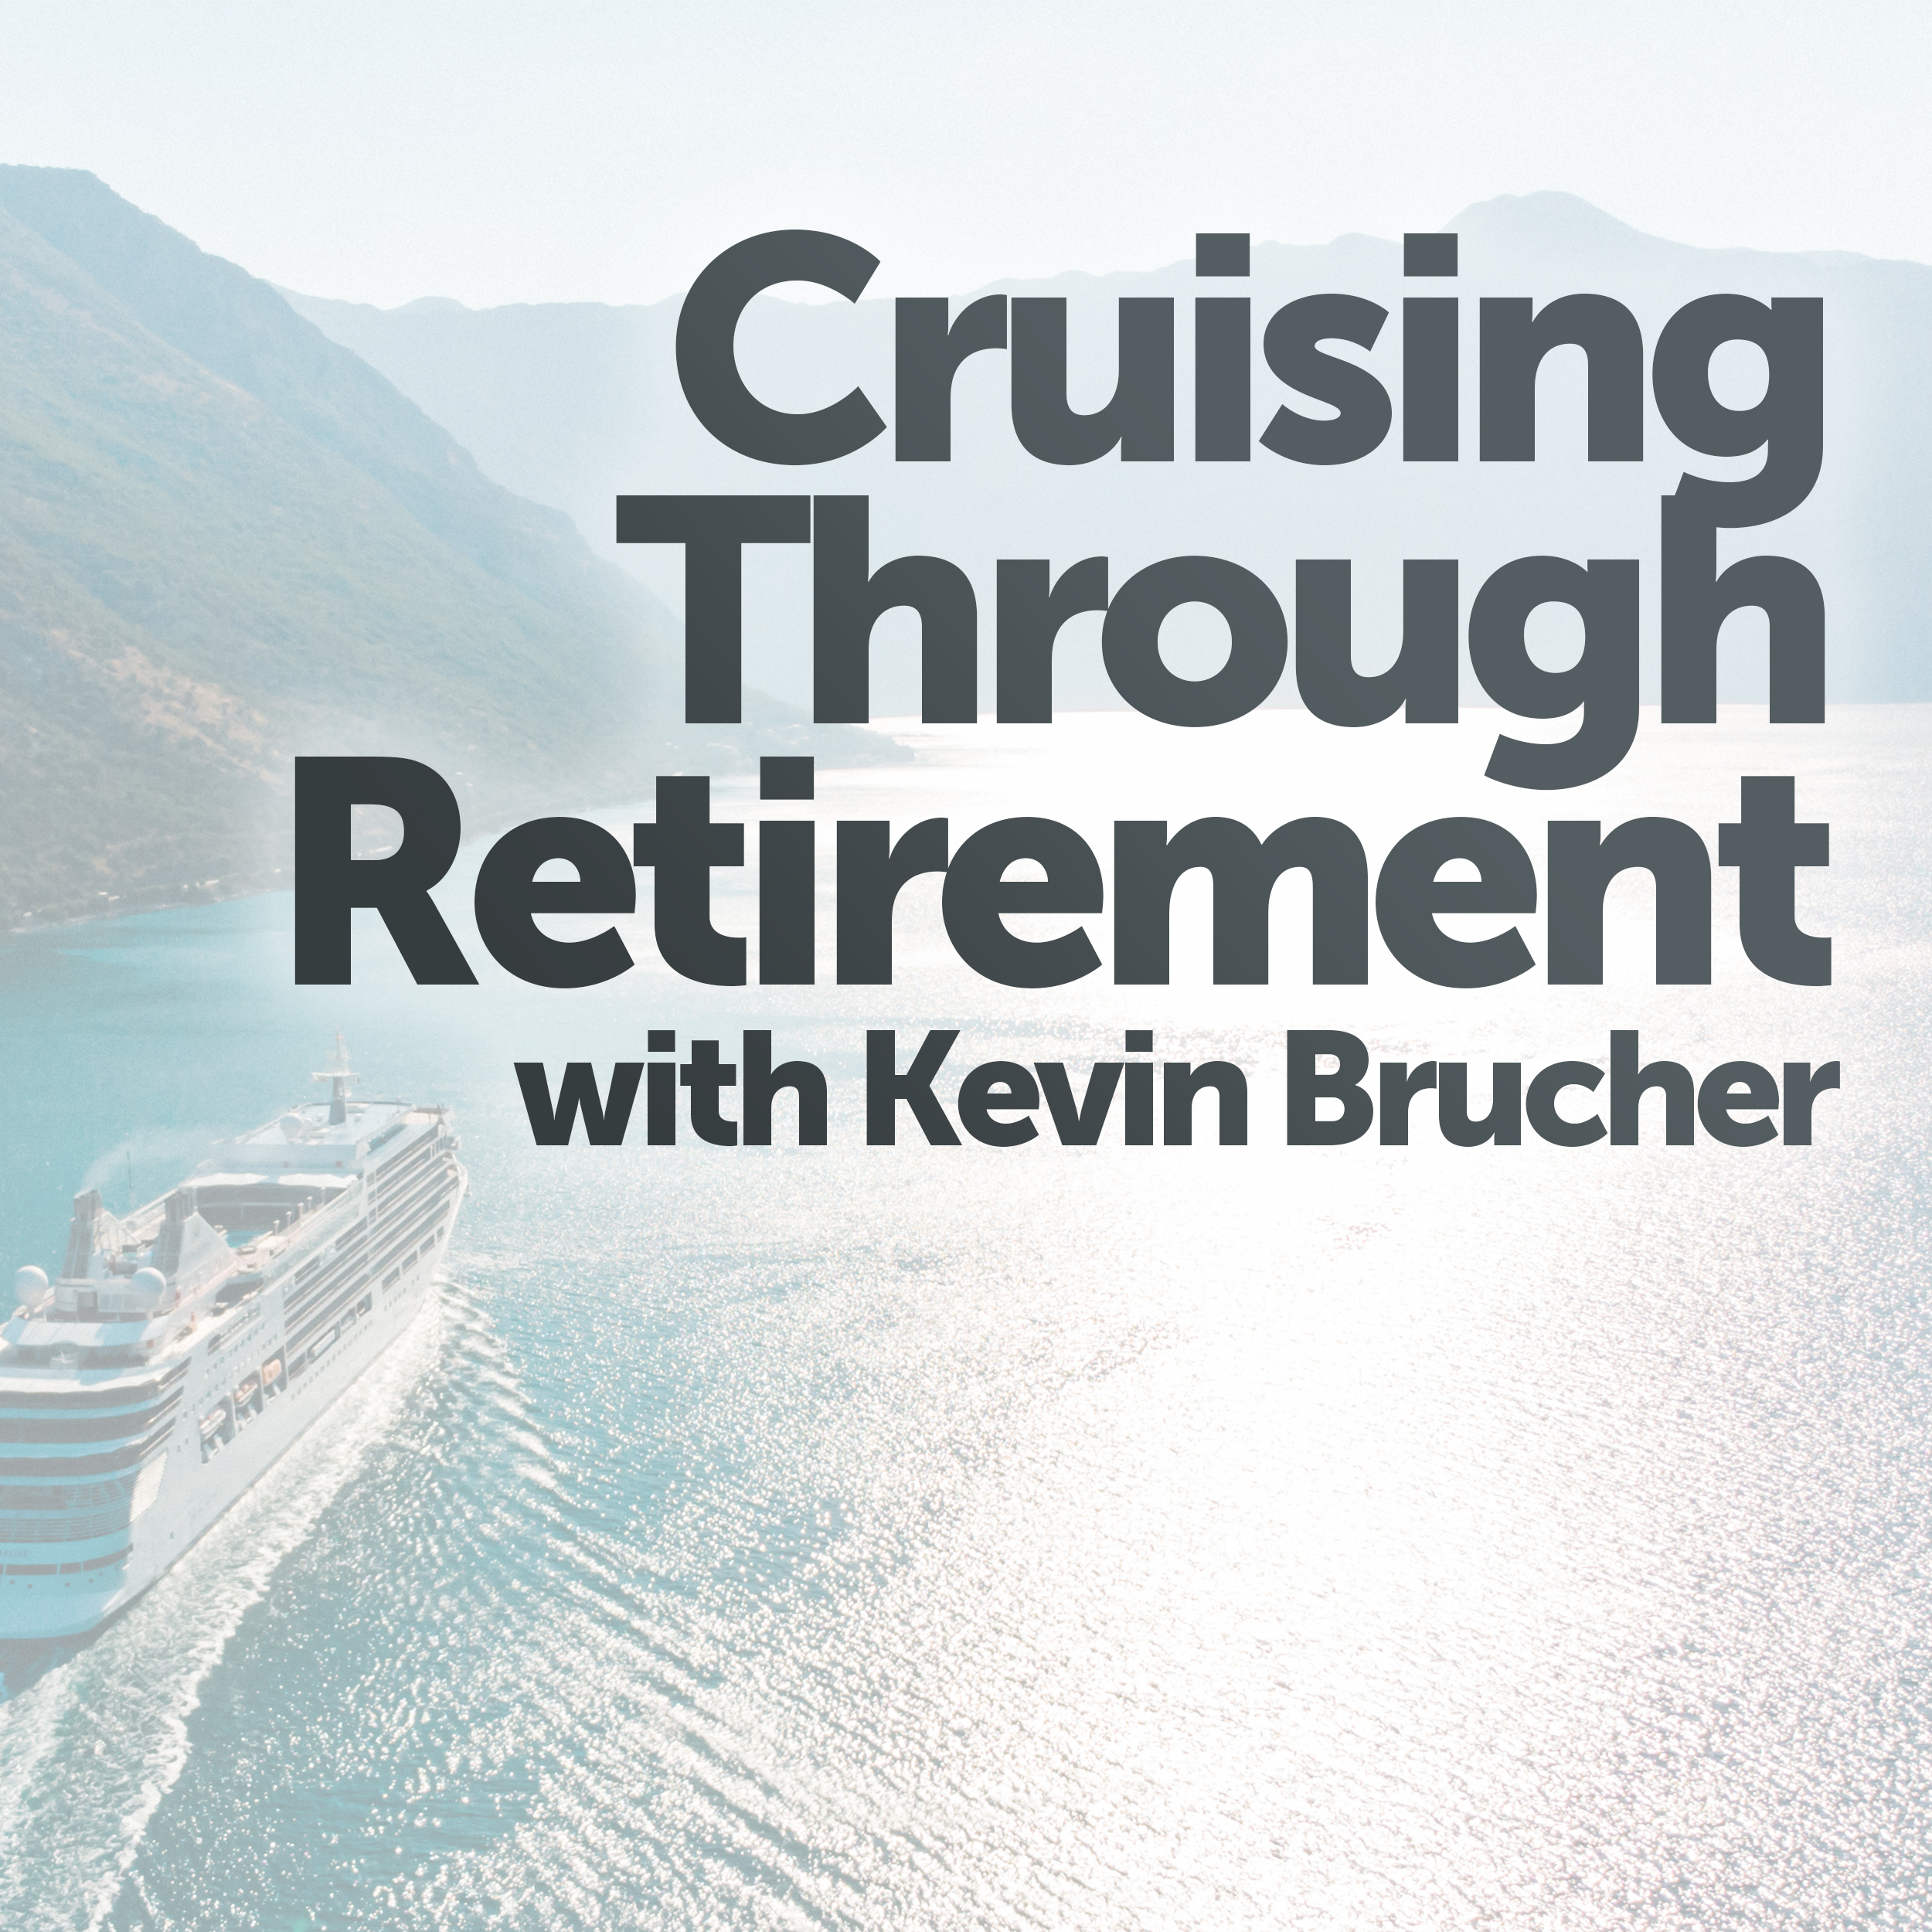 Cruising Through Retirement On today’s show we’ll show you how to diagnose and treat your financial portfolio stress.